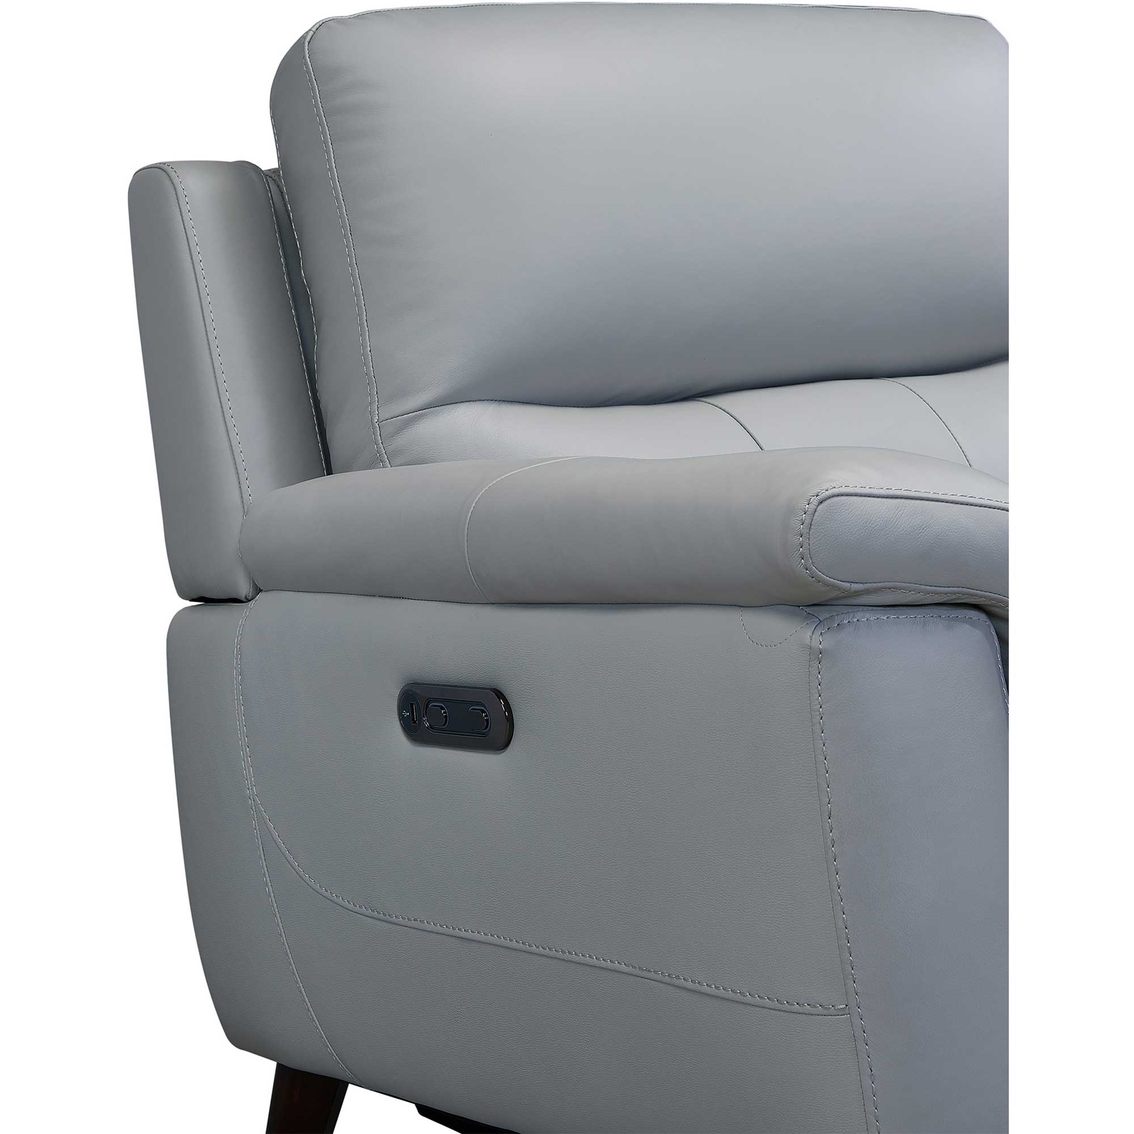 Armen Living Lizette Contemporary Top Grain Leather Power Recliner Chair with USB - Image 5 of 10